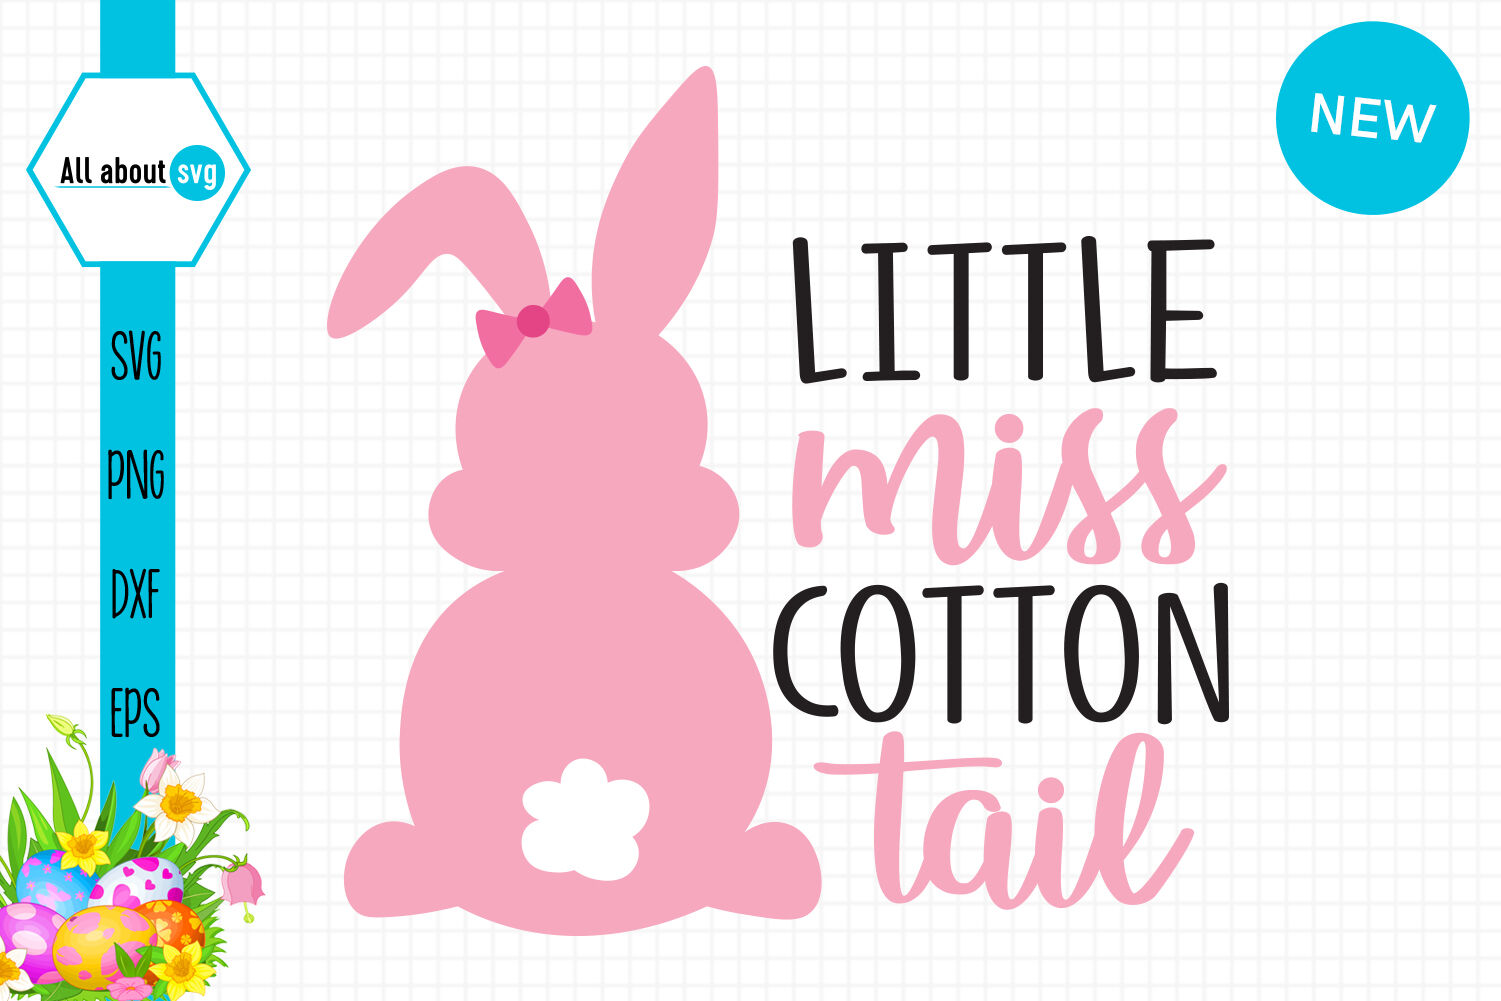 Download Cotton Tail Svg Socuteappliques New Baby Svg Girls Easter Svg Easter Cut File Easter Bunny Svg Shake Your Cottontail Easter Svg Clip Art Art Collectibles